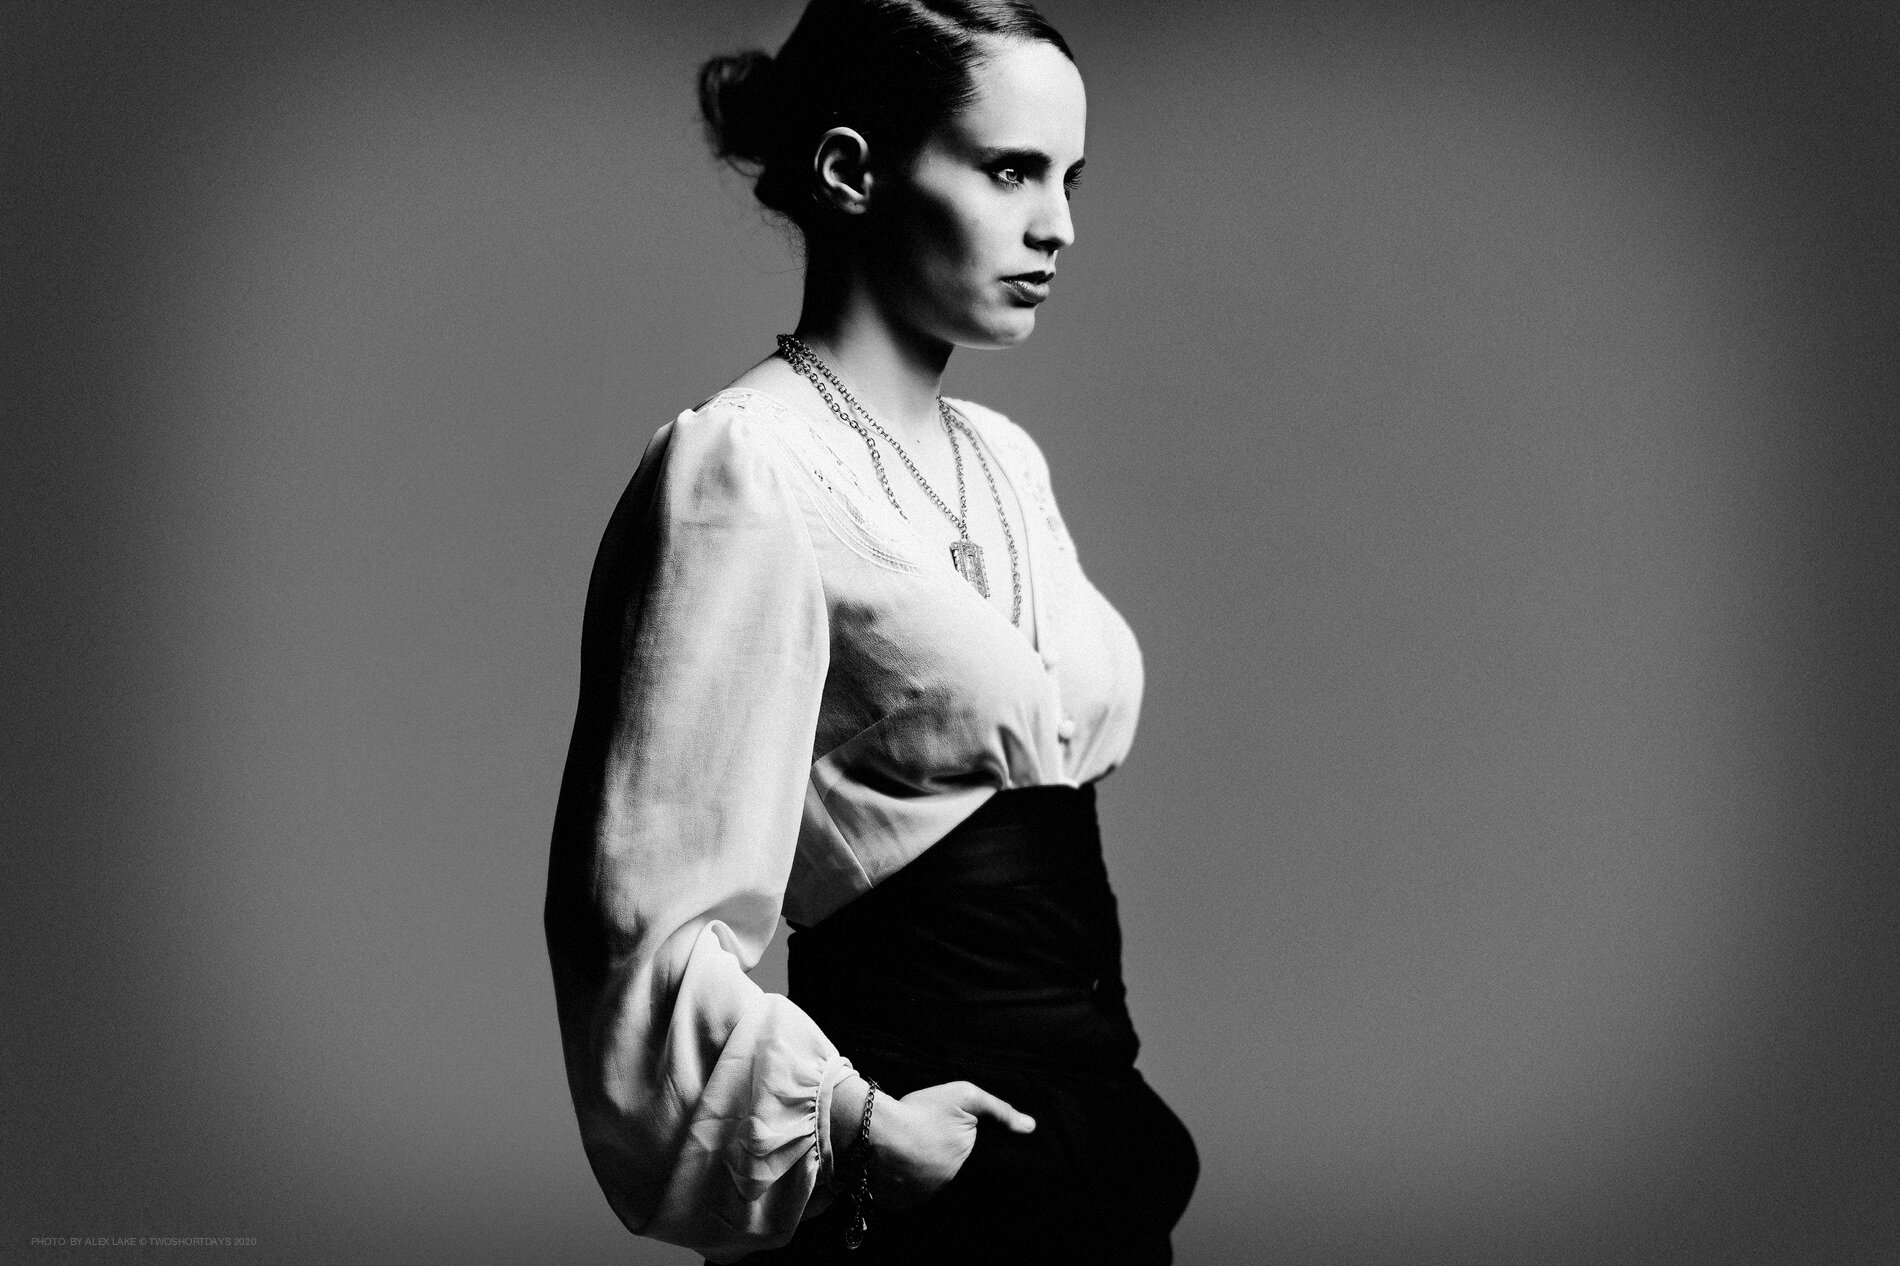 anna_calvi_photography_copyright_ALEX_LAKE_do_not_reproduce_without_permission_TWOSHORTDAYS.jpg